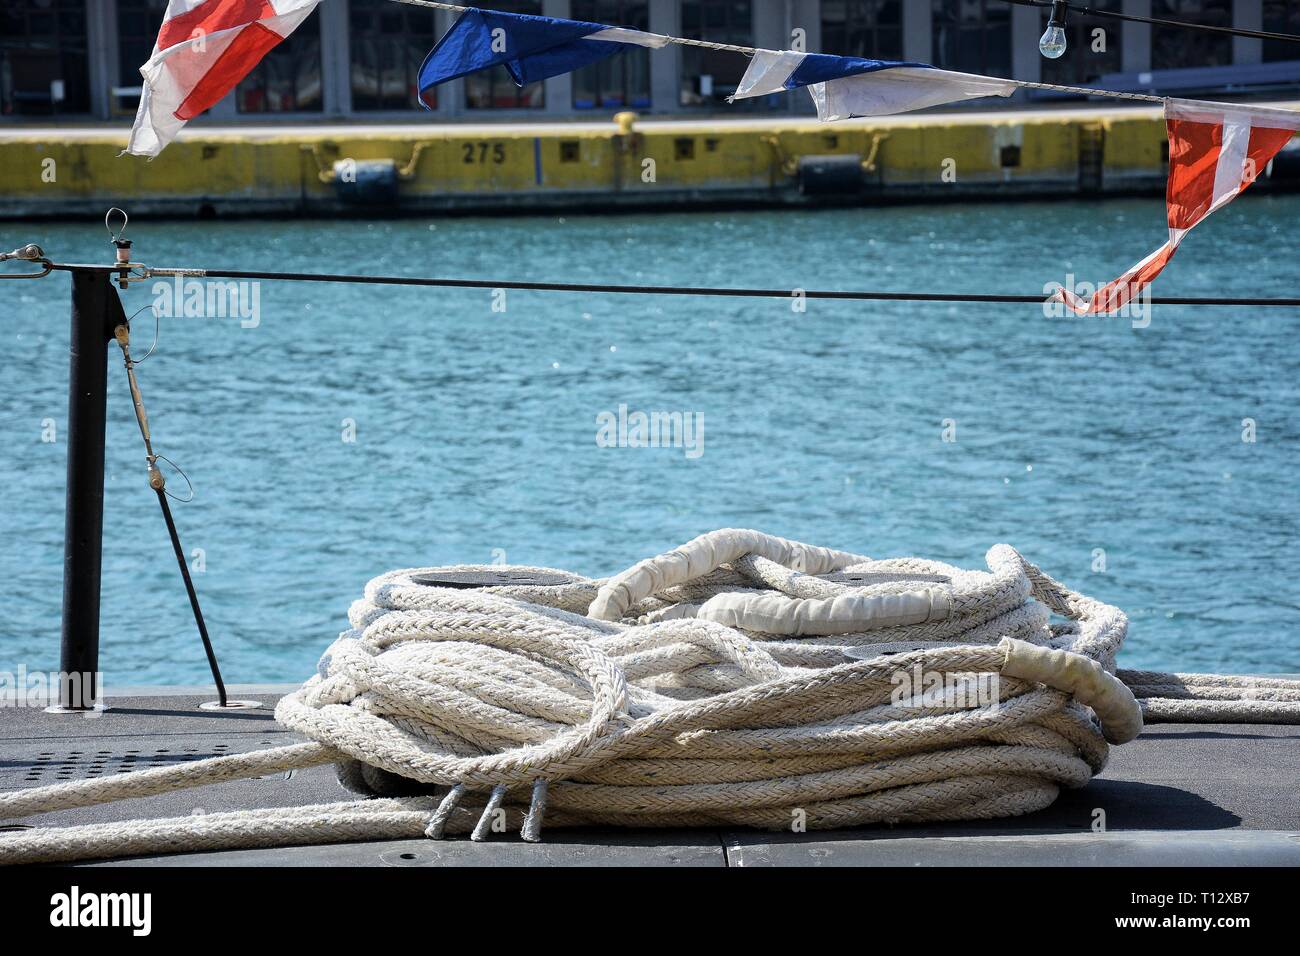 A rope seen on the submarine Matrozos at Piraeus Port. Due to the Greek Independence Day Piraeus Port is open to the public, a national holiday celebrated annually in Greece on March 25, commemorating the start of the War of Greek’s Independence in 1821. Stock Photo